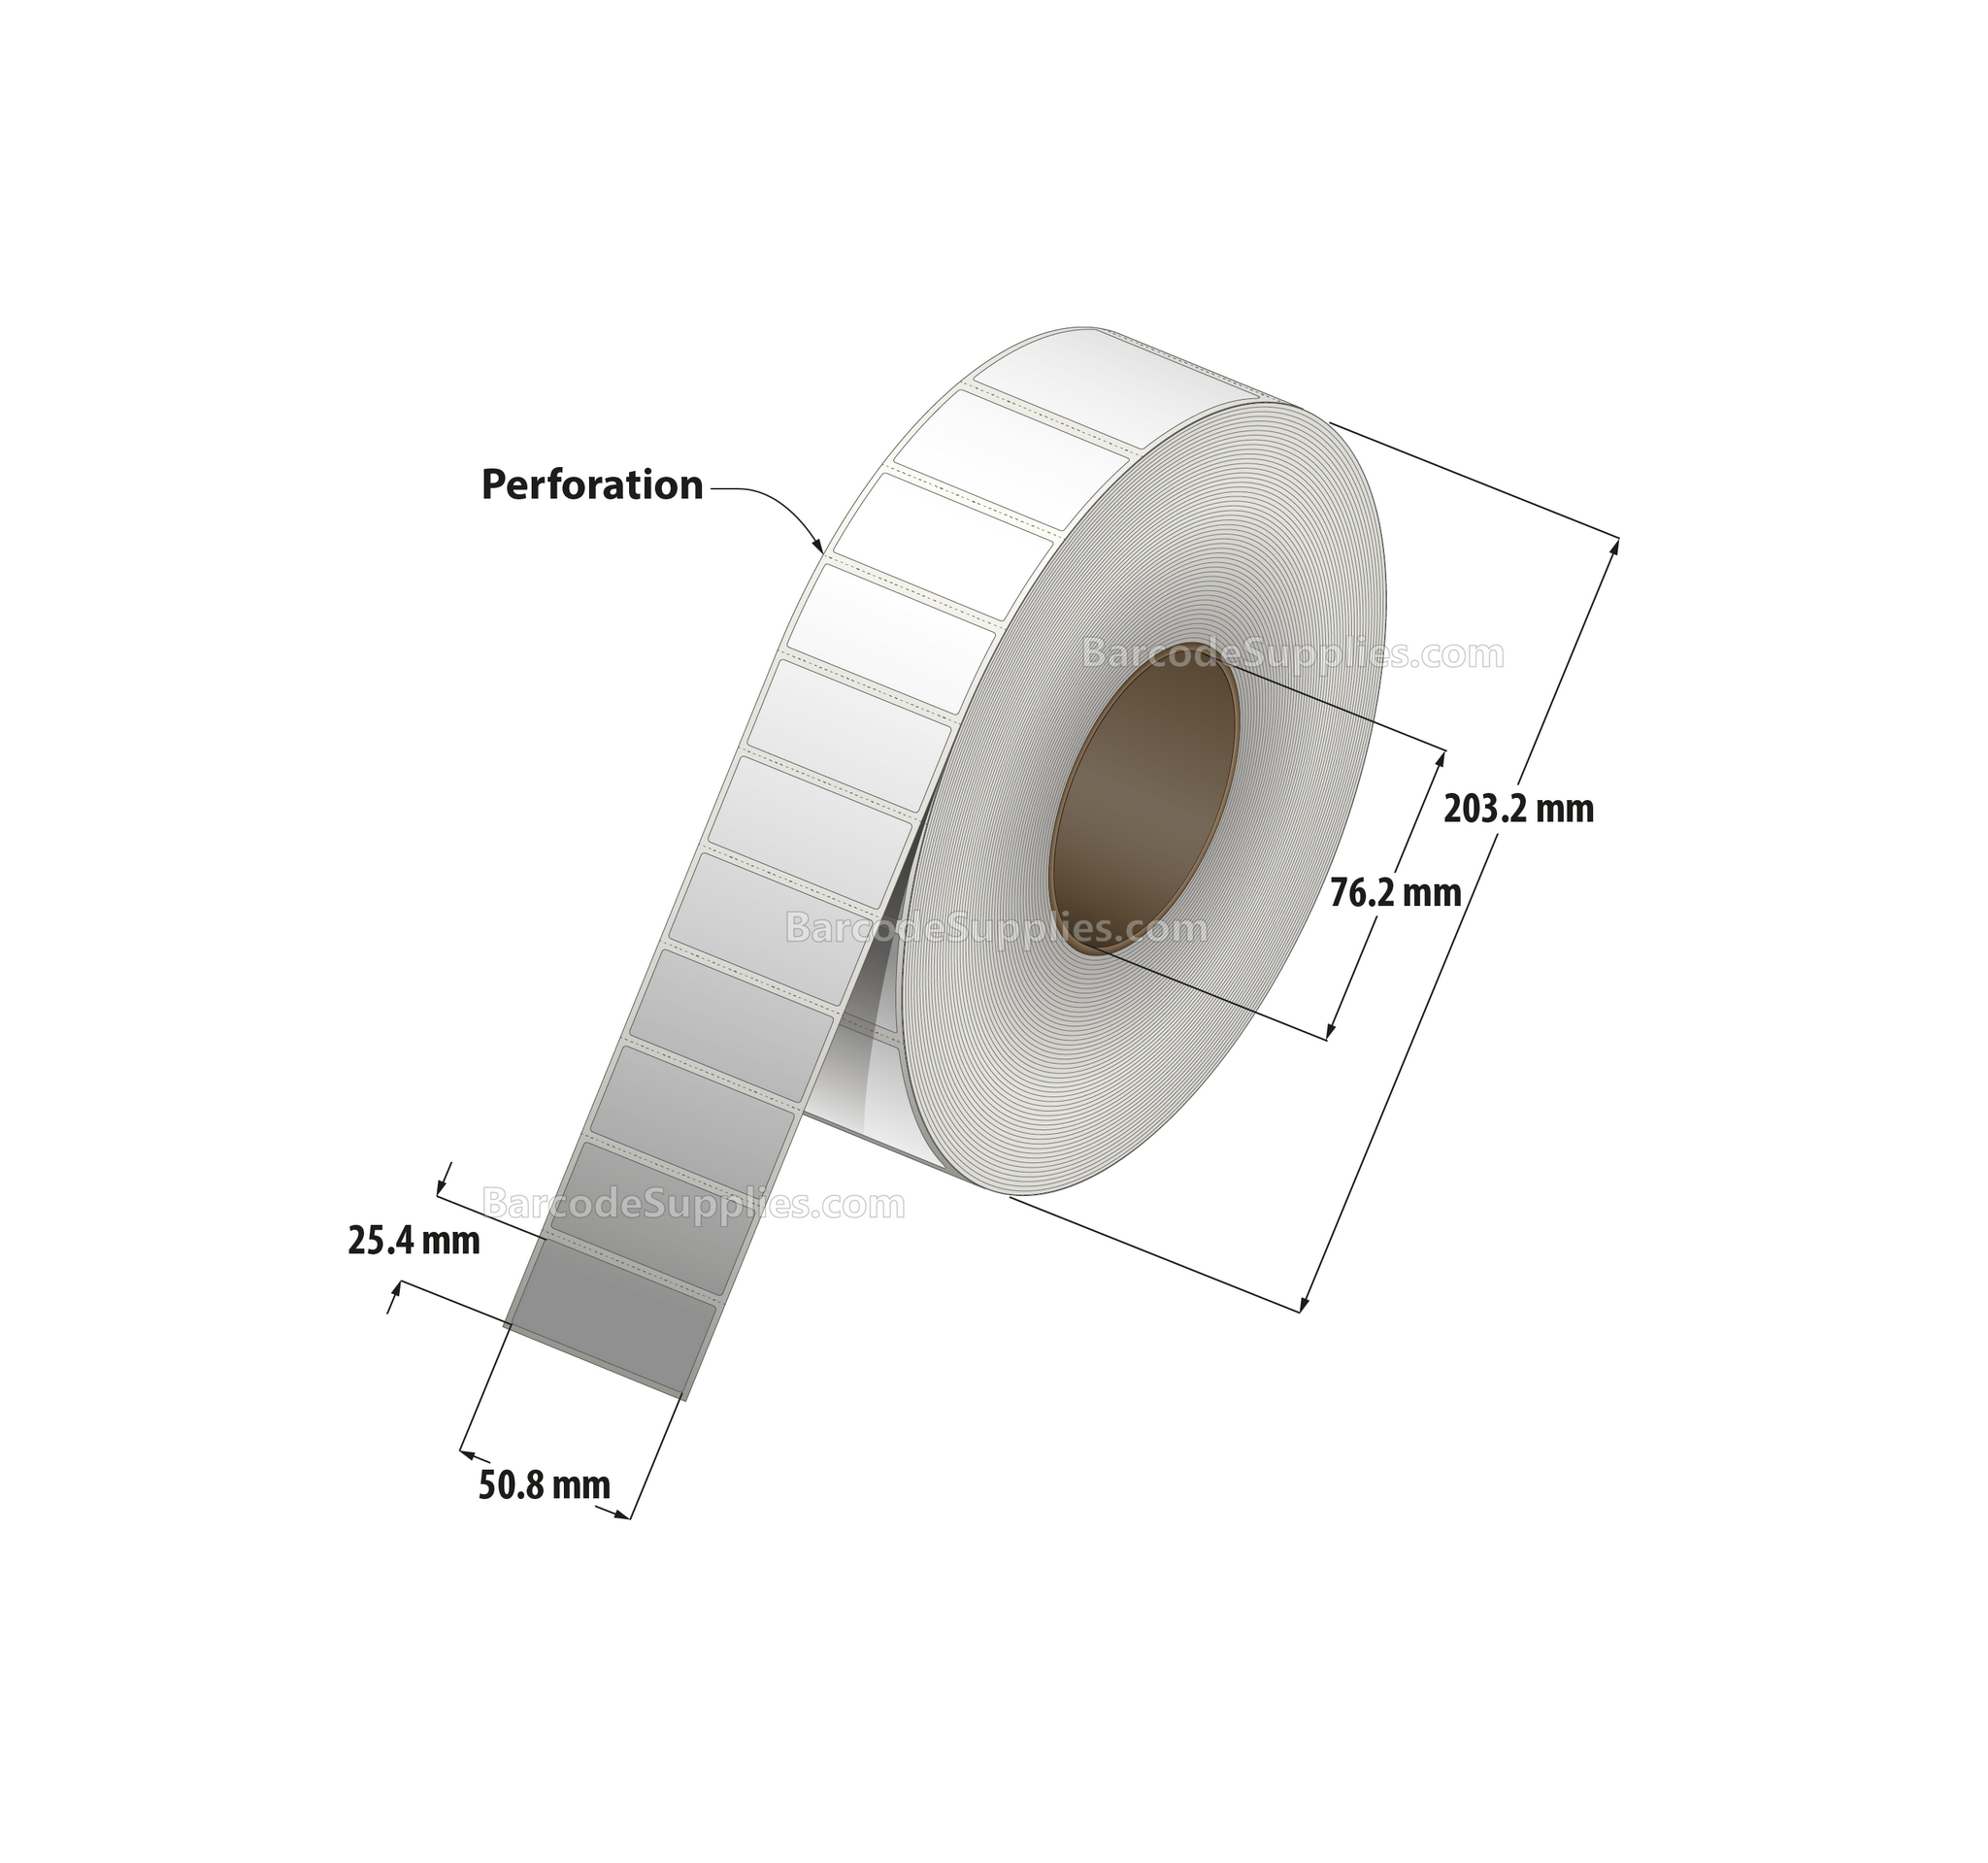 2 x 1 Thermal Transfer White Labels With Permanent Adhesive - Perforated - 5000 Labels Per Roll - Carton Of 8 Rolls - 40000 Labels Total - MPN: RP-2-1-5000-3